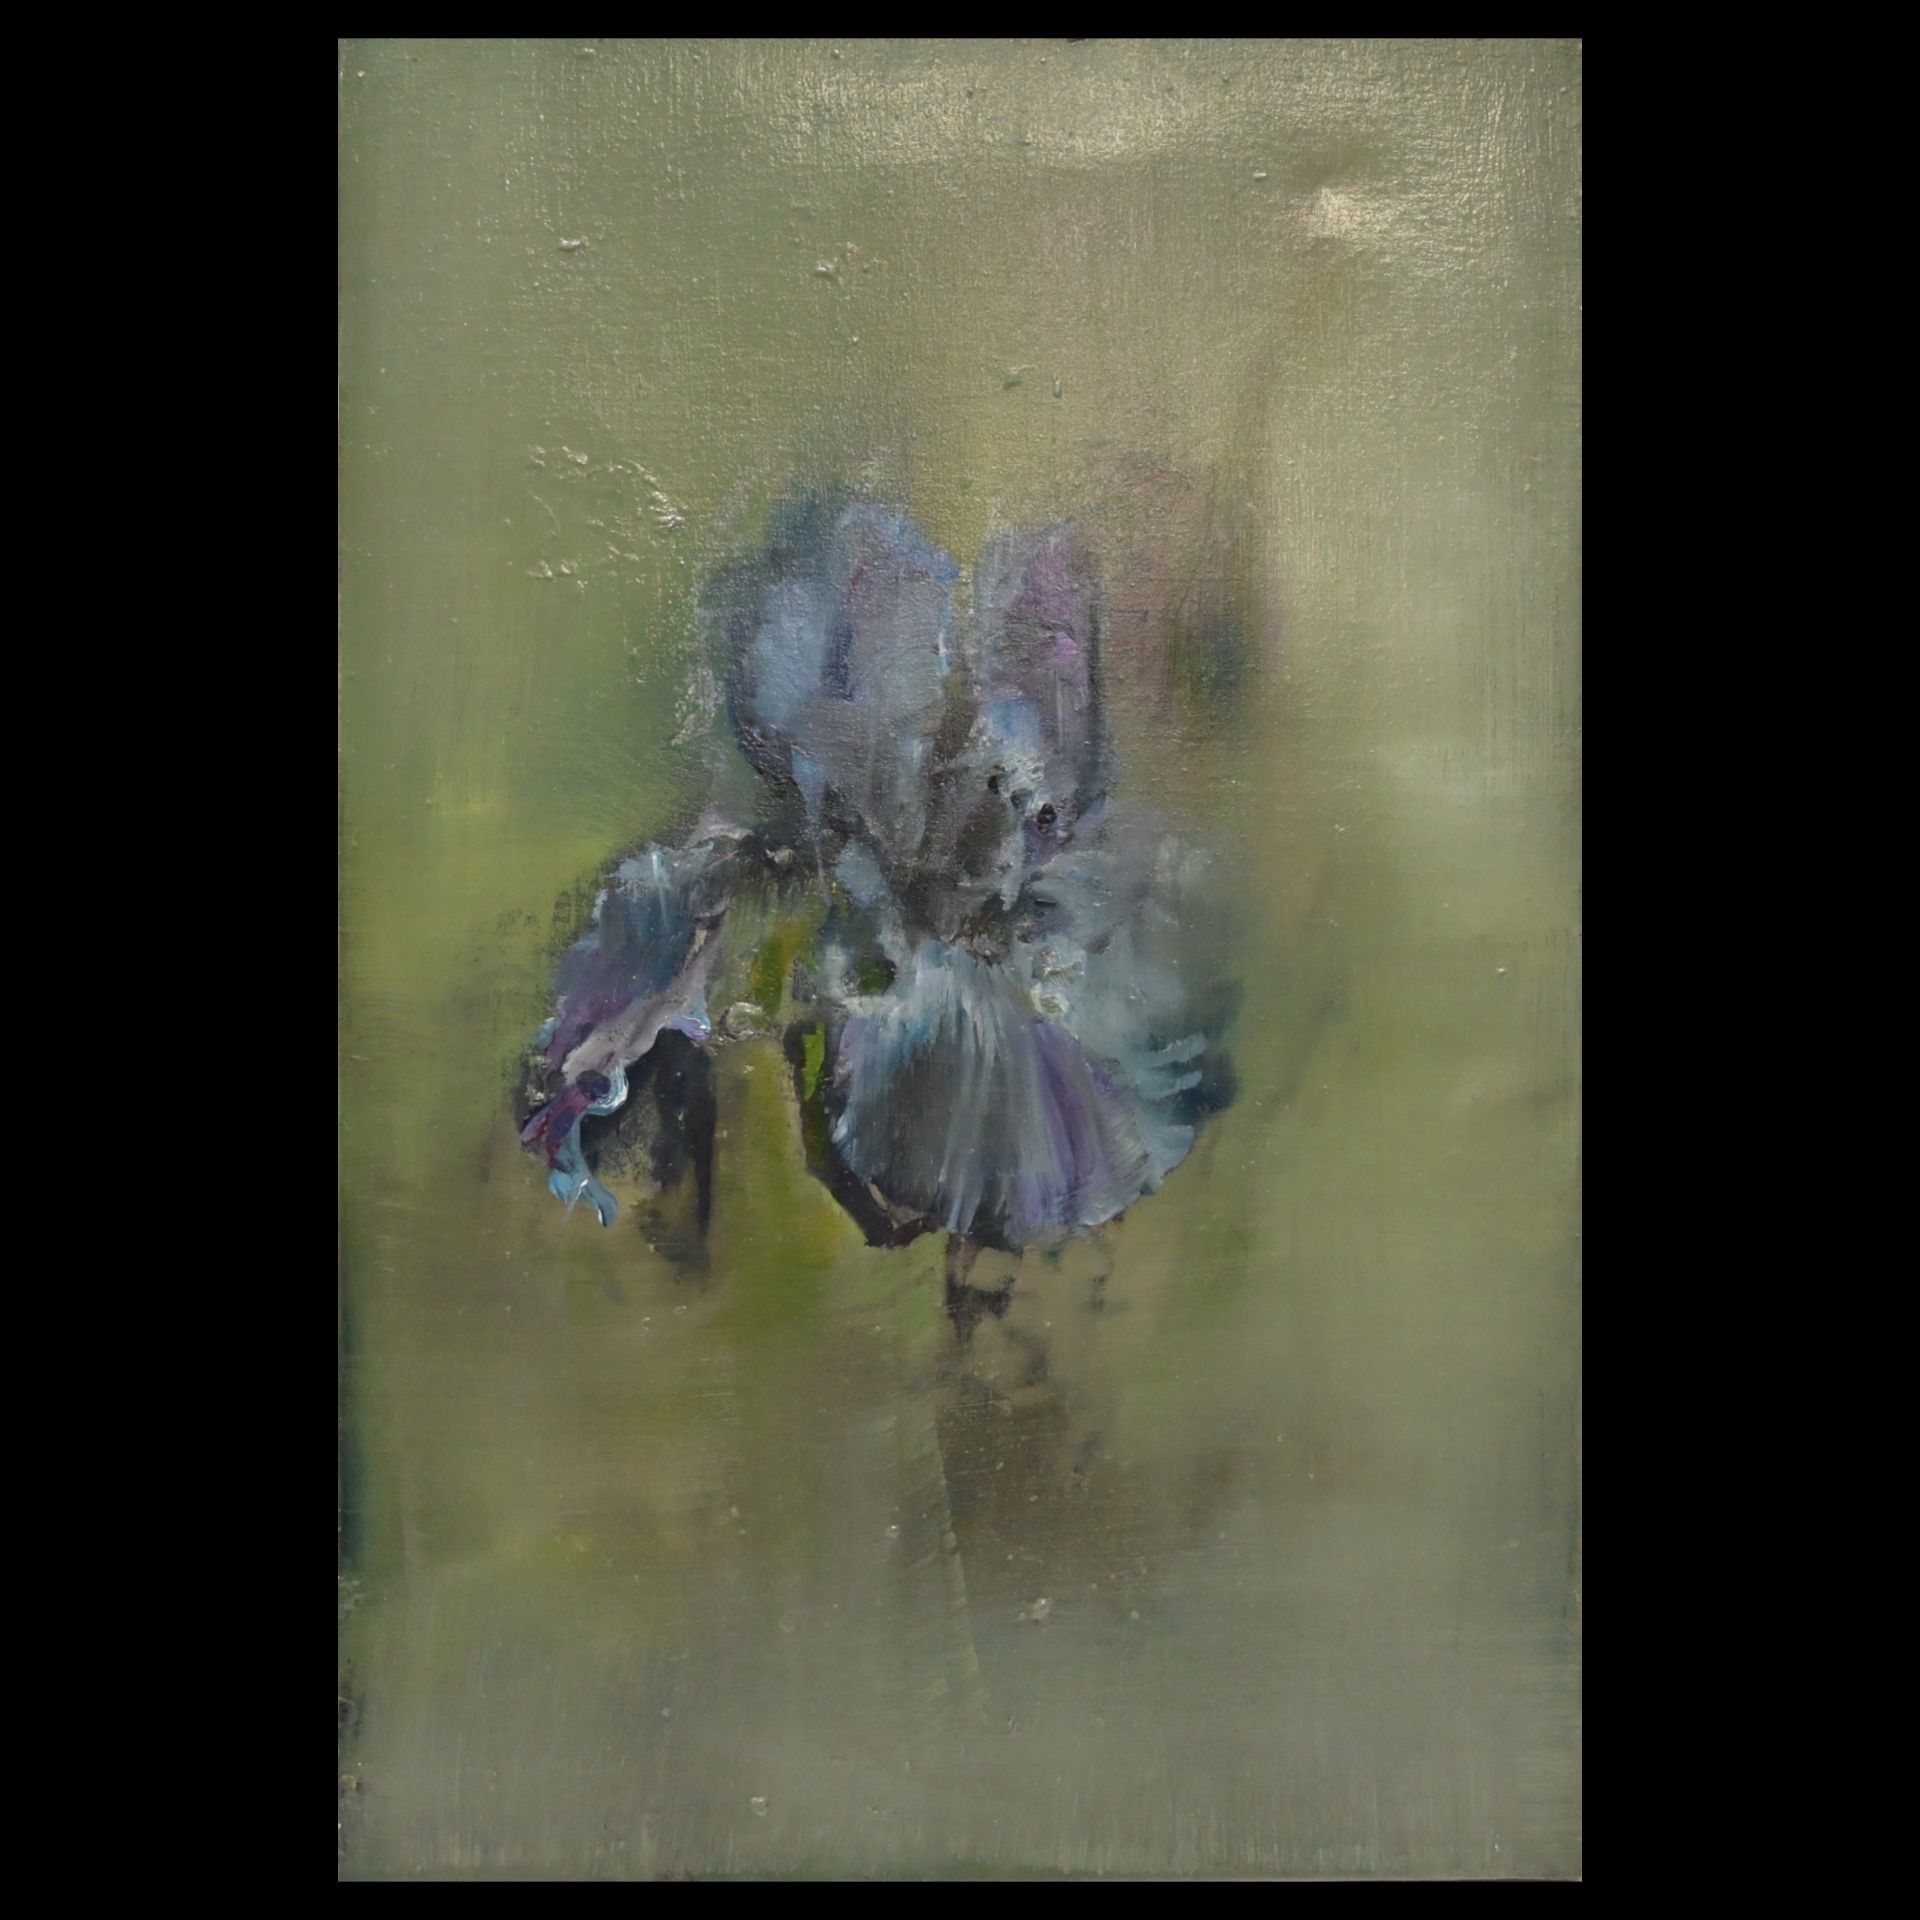 Clement ROSENTHAL (1956) iris flower on green background, oil on canvas, 2002. - Image 2 of 8